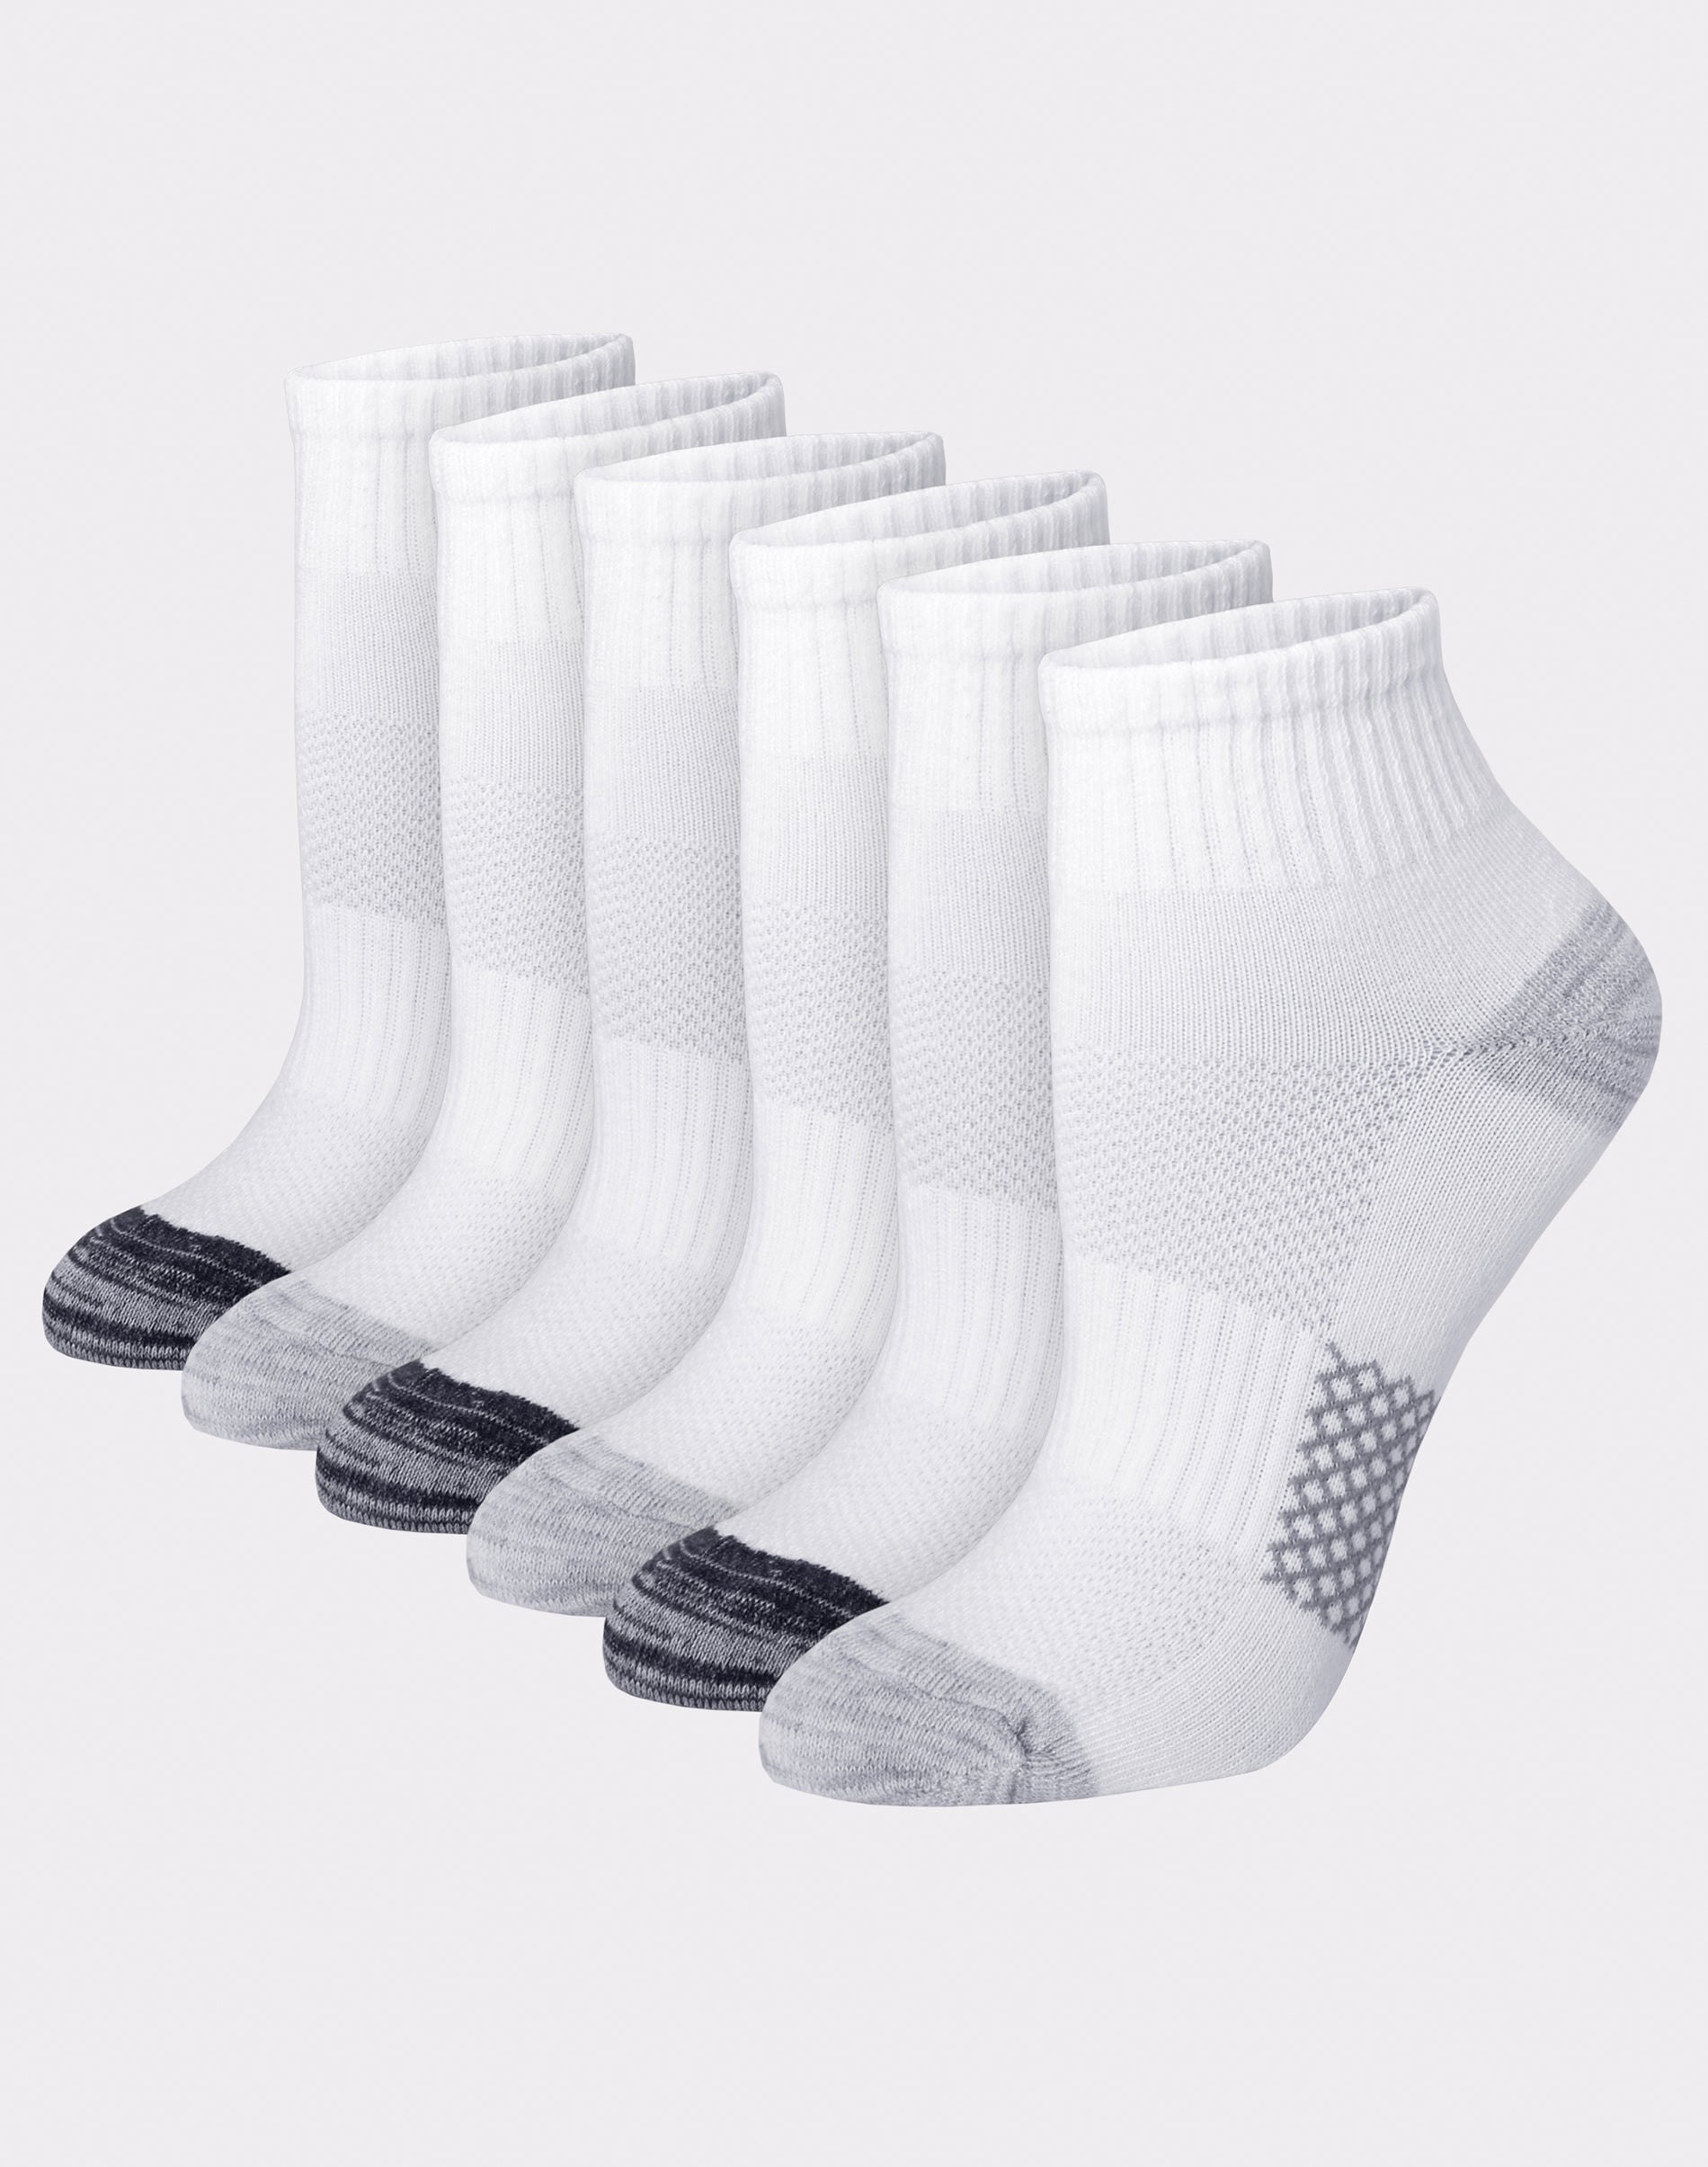 Hanes X-Temp Women's Ankle Socks, Extended Sizes, 6-Pairs White Assorted  Stripes 8-12 